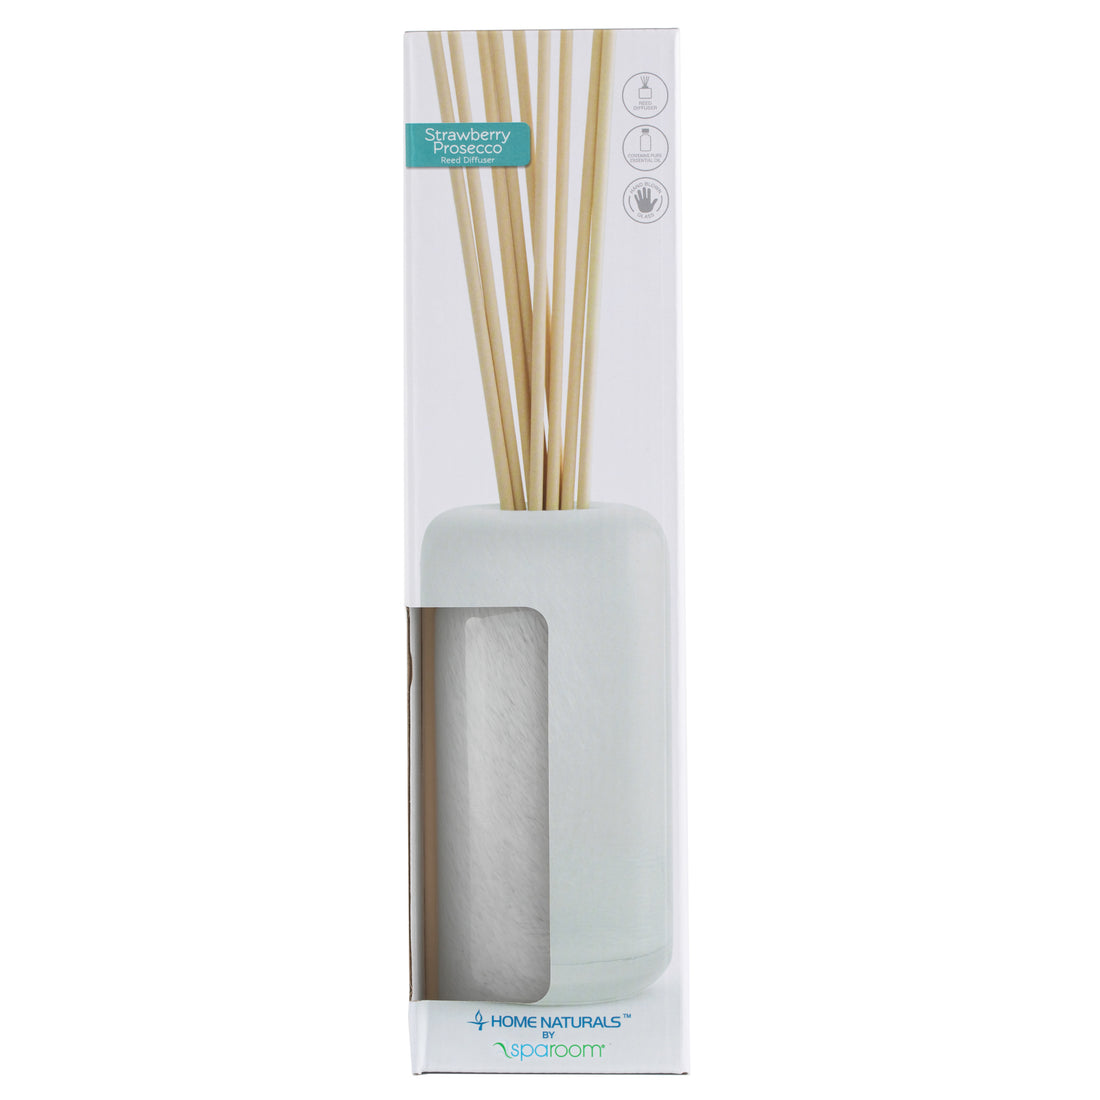 Sparoom Strawberry Prosecco Oil Glass Reed Diffuser with Reed Sticks - 4 units (200ml)